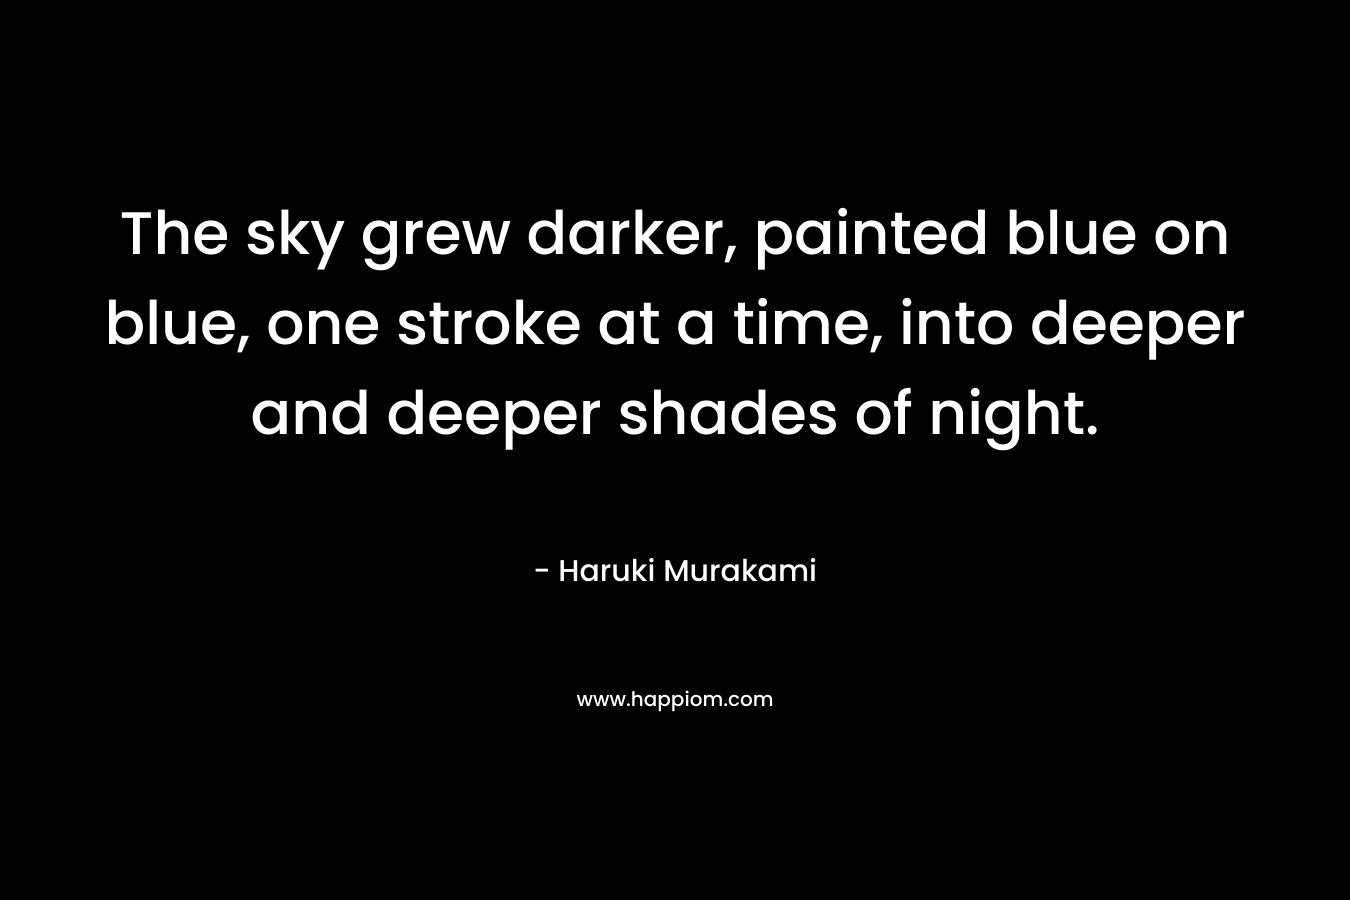 The sky grew darker, painted blue on blue, one stroke at a time, into deeper and deeper shades of night.